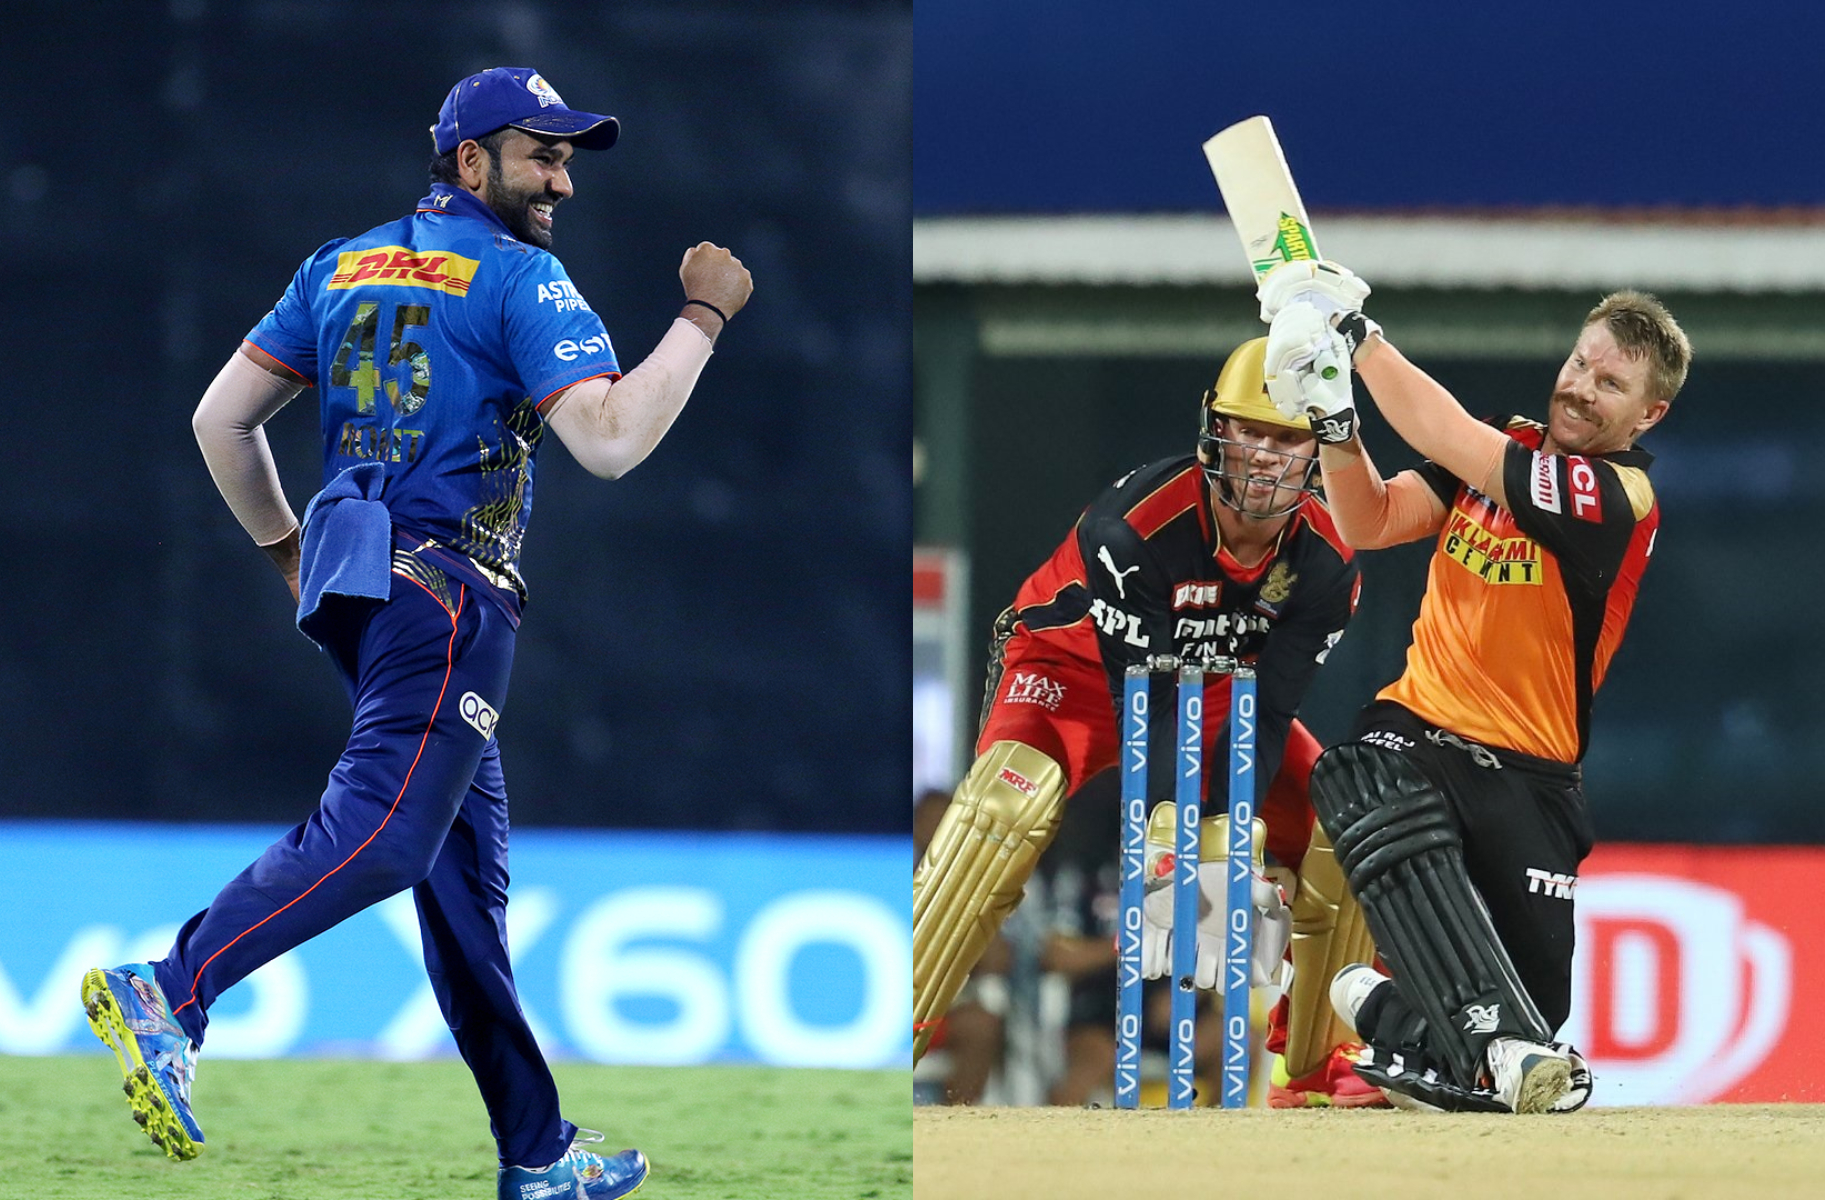 SRH is yet to win a match in the IPL 2021, while MI registered their first win recently | IPL/BCCI